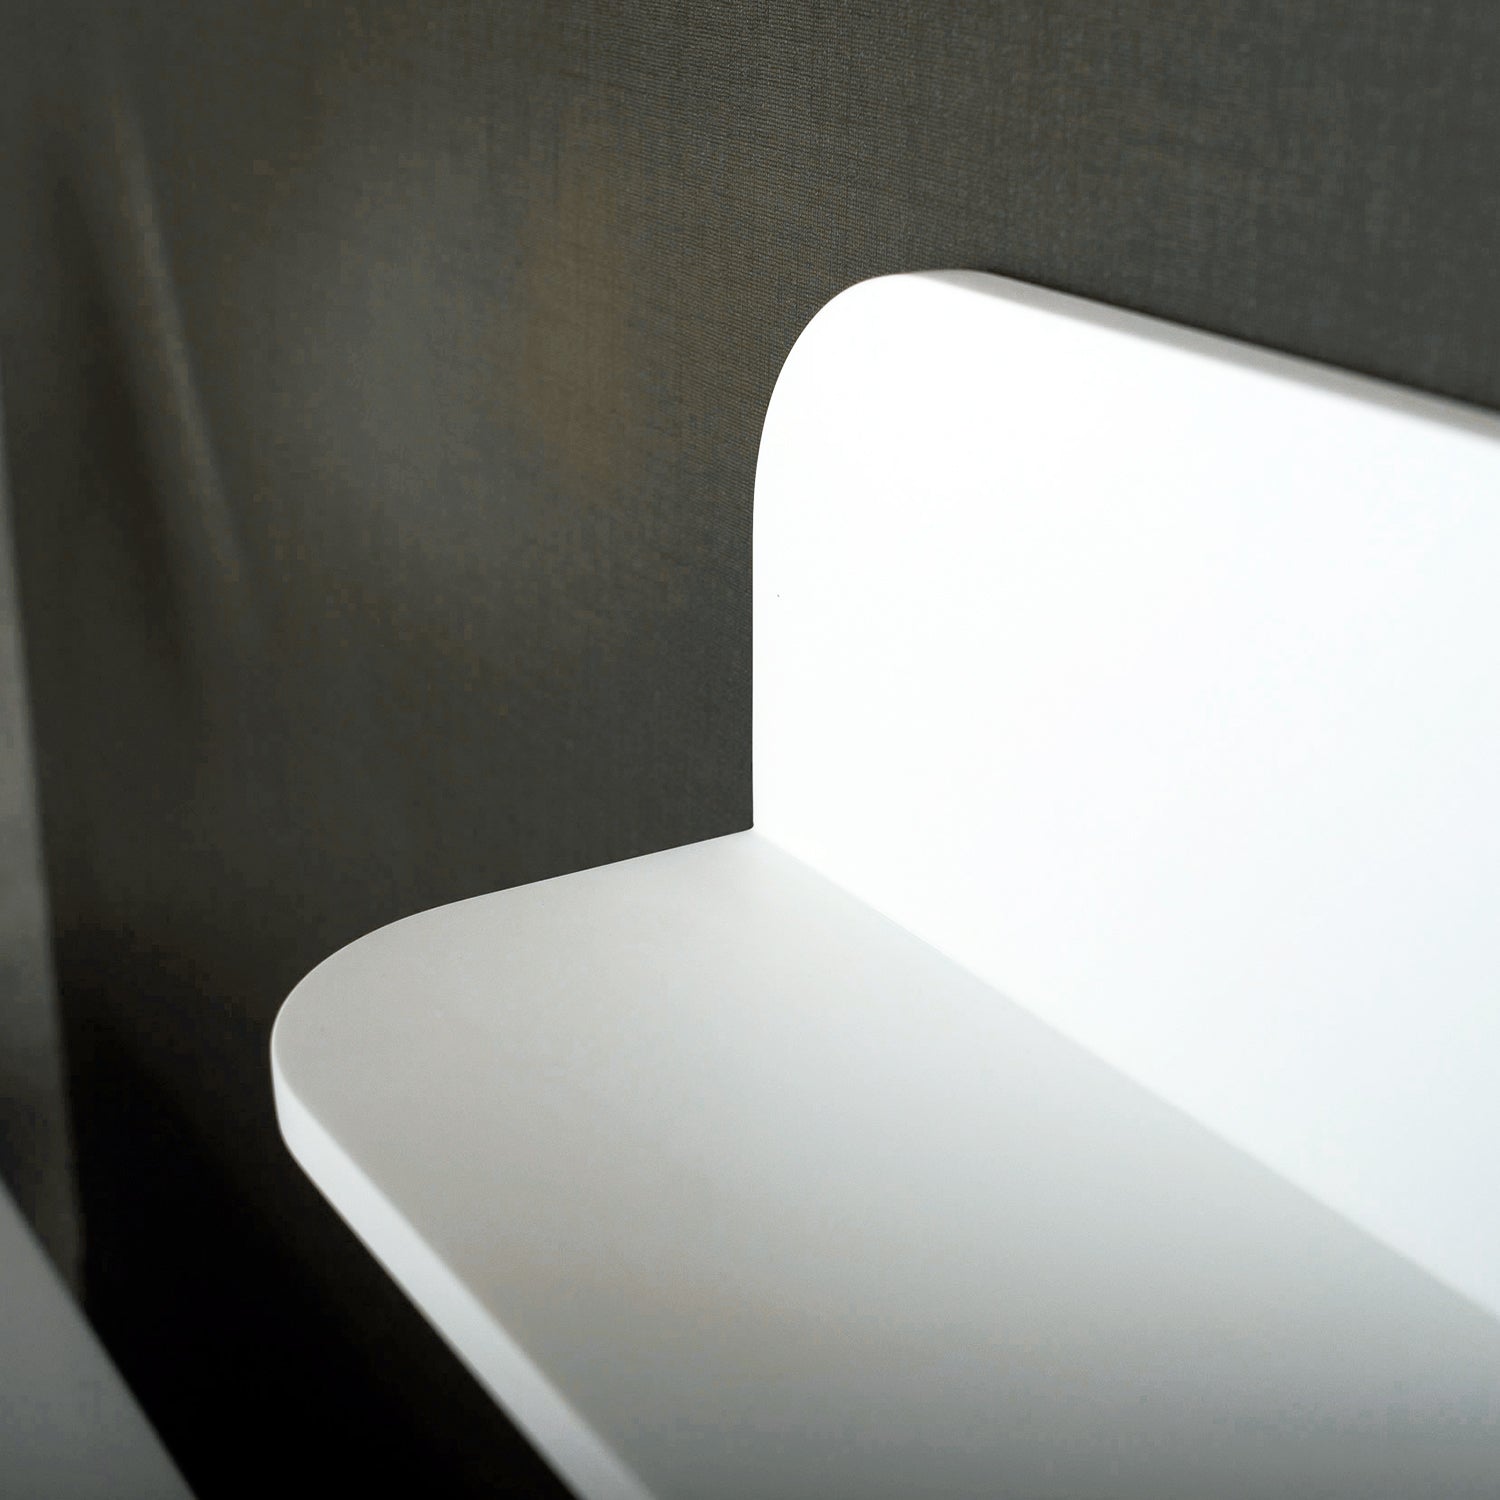 DAX Solid Surface Bathroom Shelf, Wall Mount, White Matte Finish, 35-7/16 x 4-3/4 x 4-3/4 Inches (DAX-AB-1560-35)